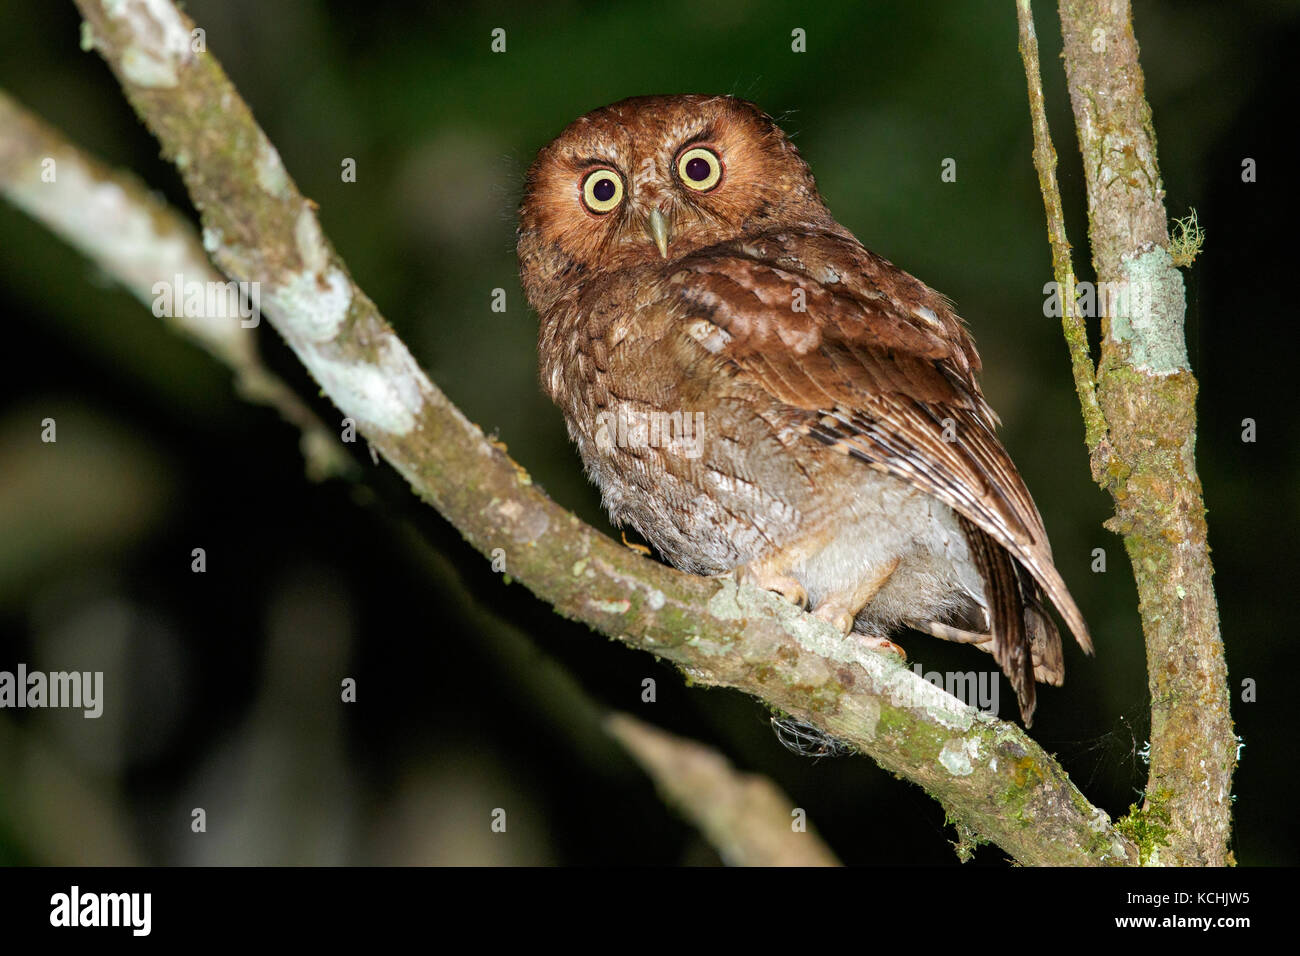 Santa Marta Screech Owl (Megascops gilesi) perched on a branch in the mountains of Colombia, South America. Stock Photo